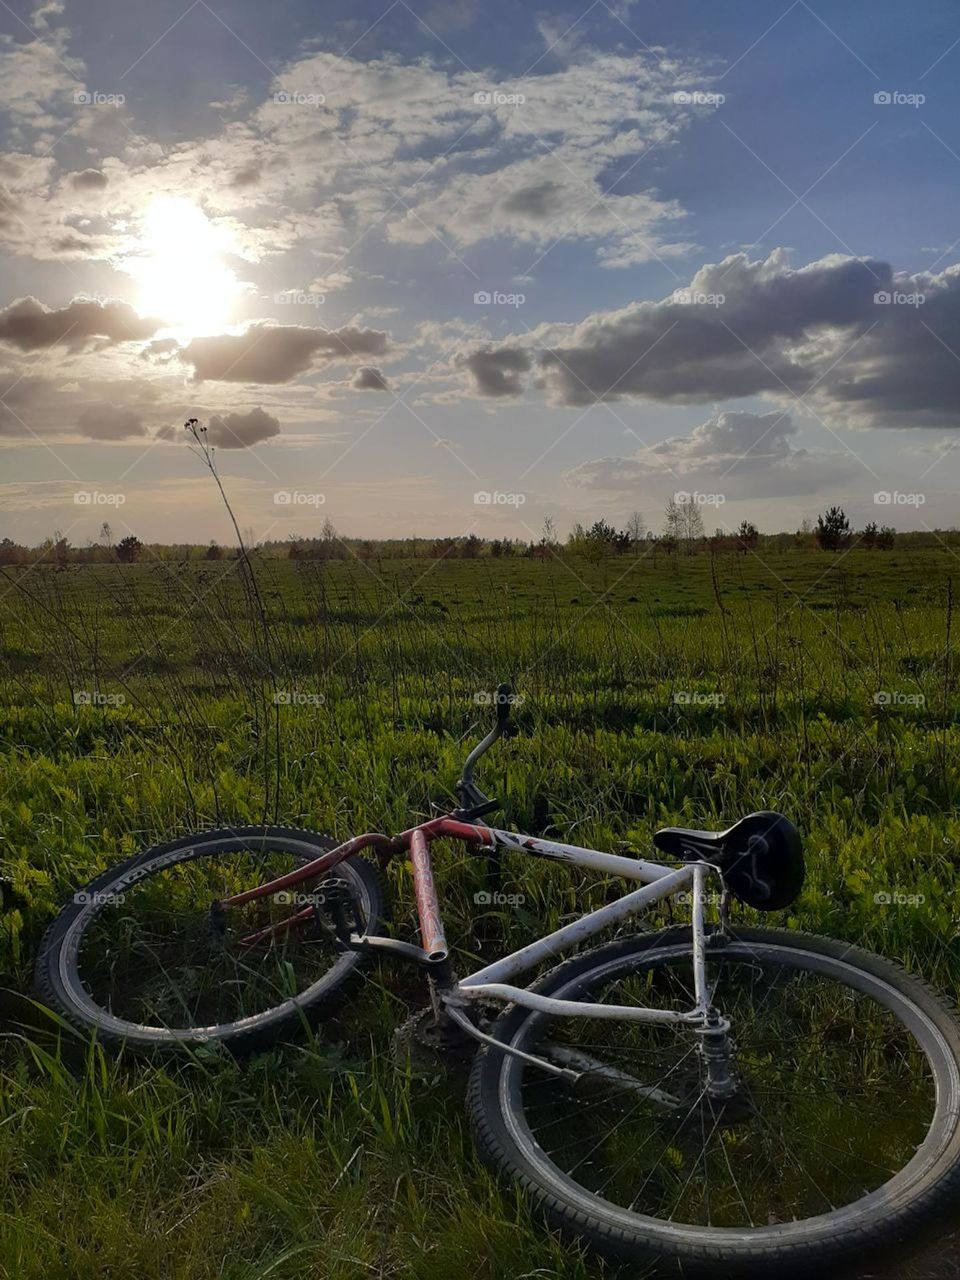 A bicycle in the middle of a green field on the background of a blue sky and white clouds